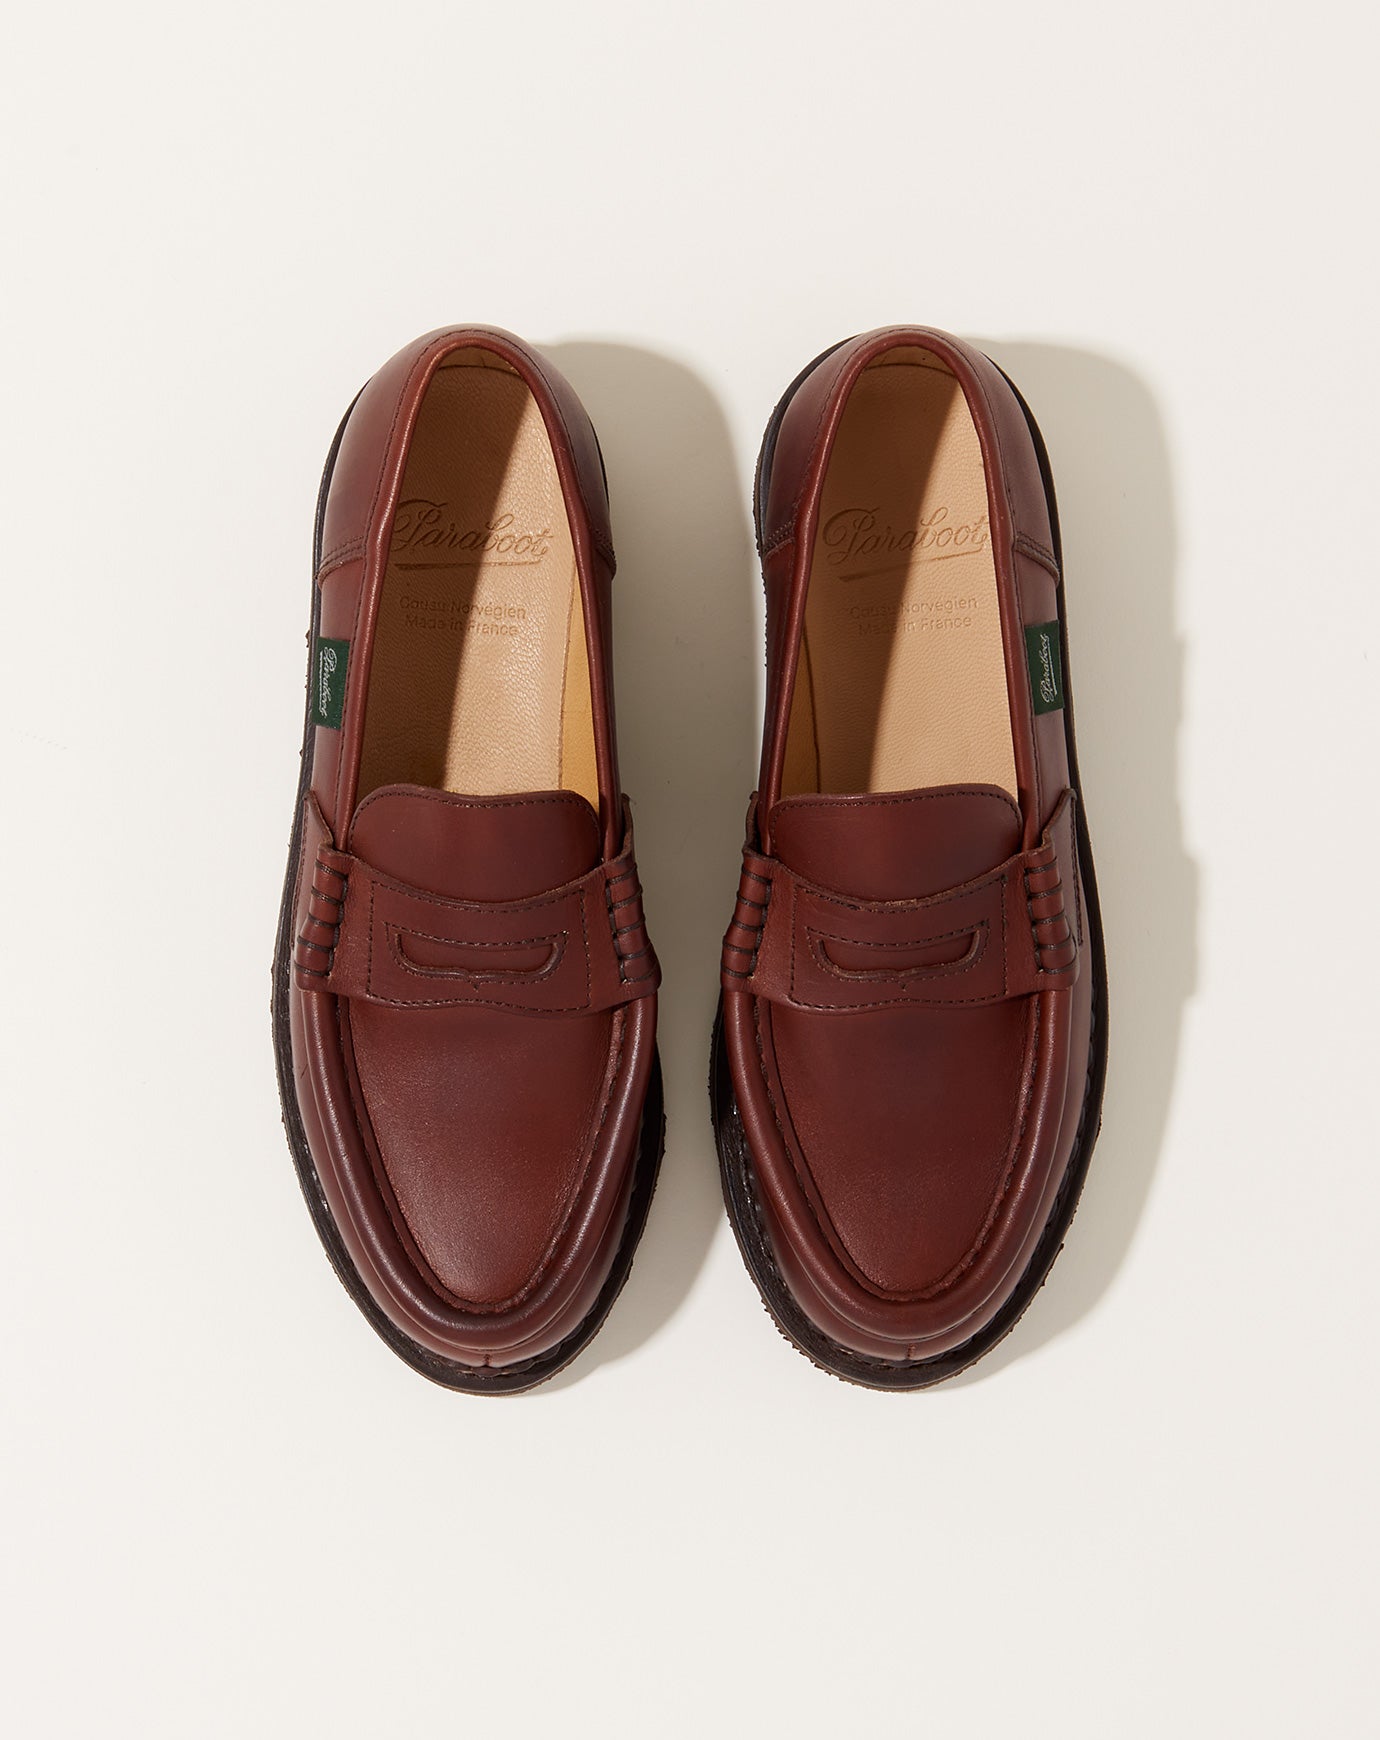 Paraboot Orsay Loafer in Lisse Marron